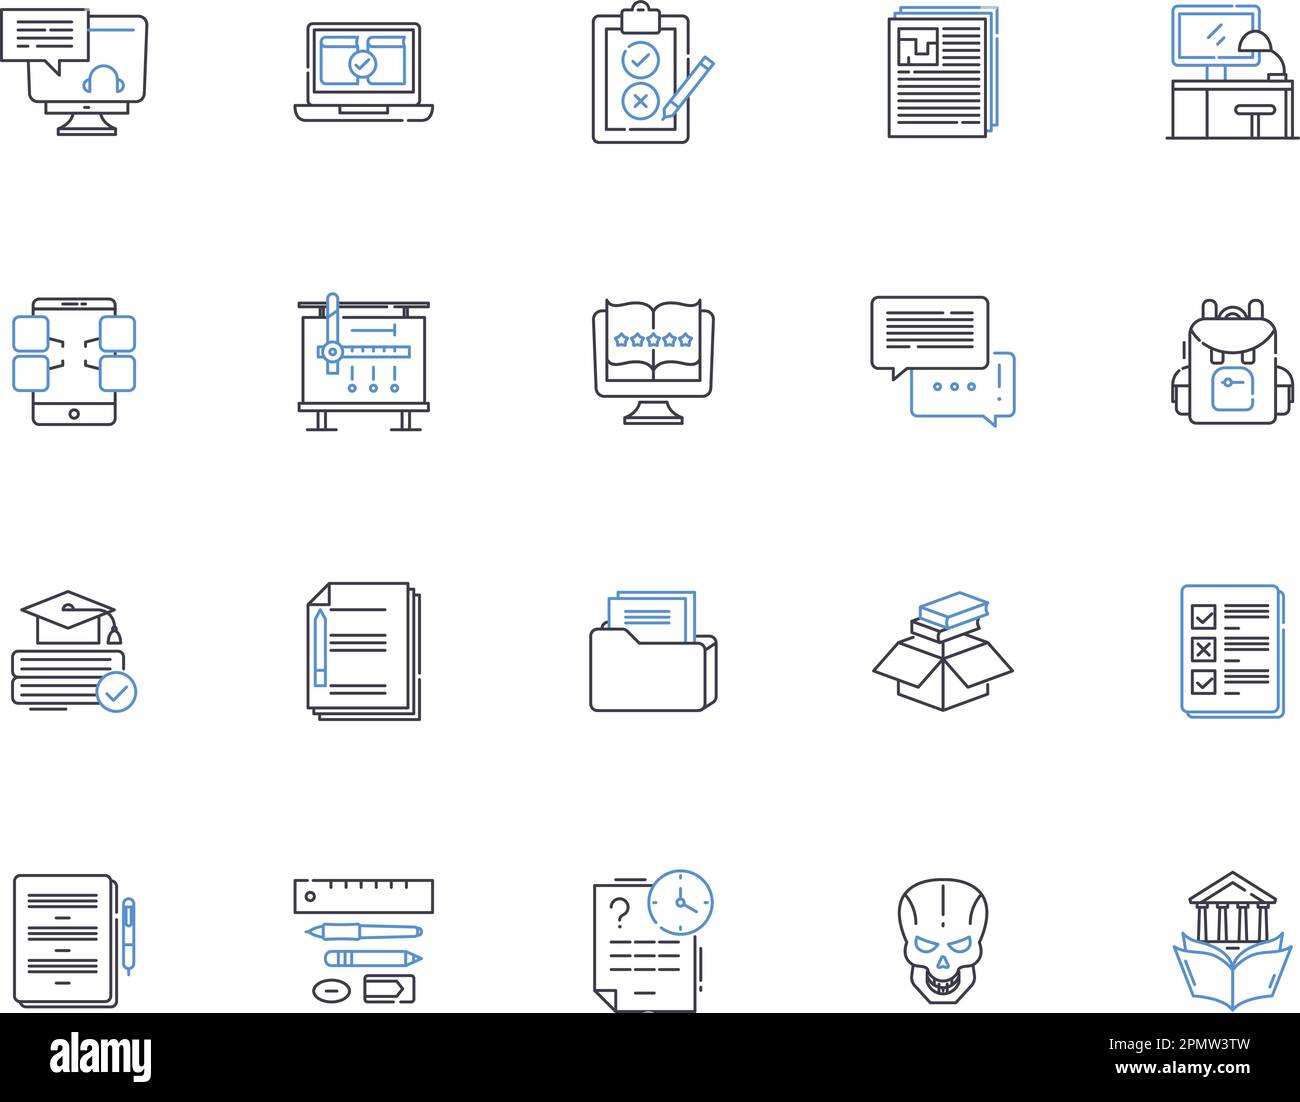 Homework outline icons collection. Exercise, Assignment, Task, Study, Quiz, Projects, Research vector and illustration concept set. Writing, Papers Stock Vector